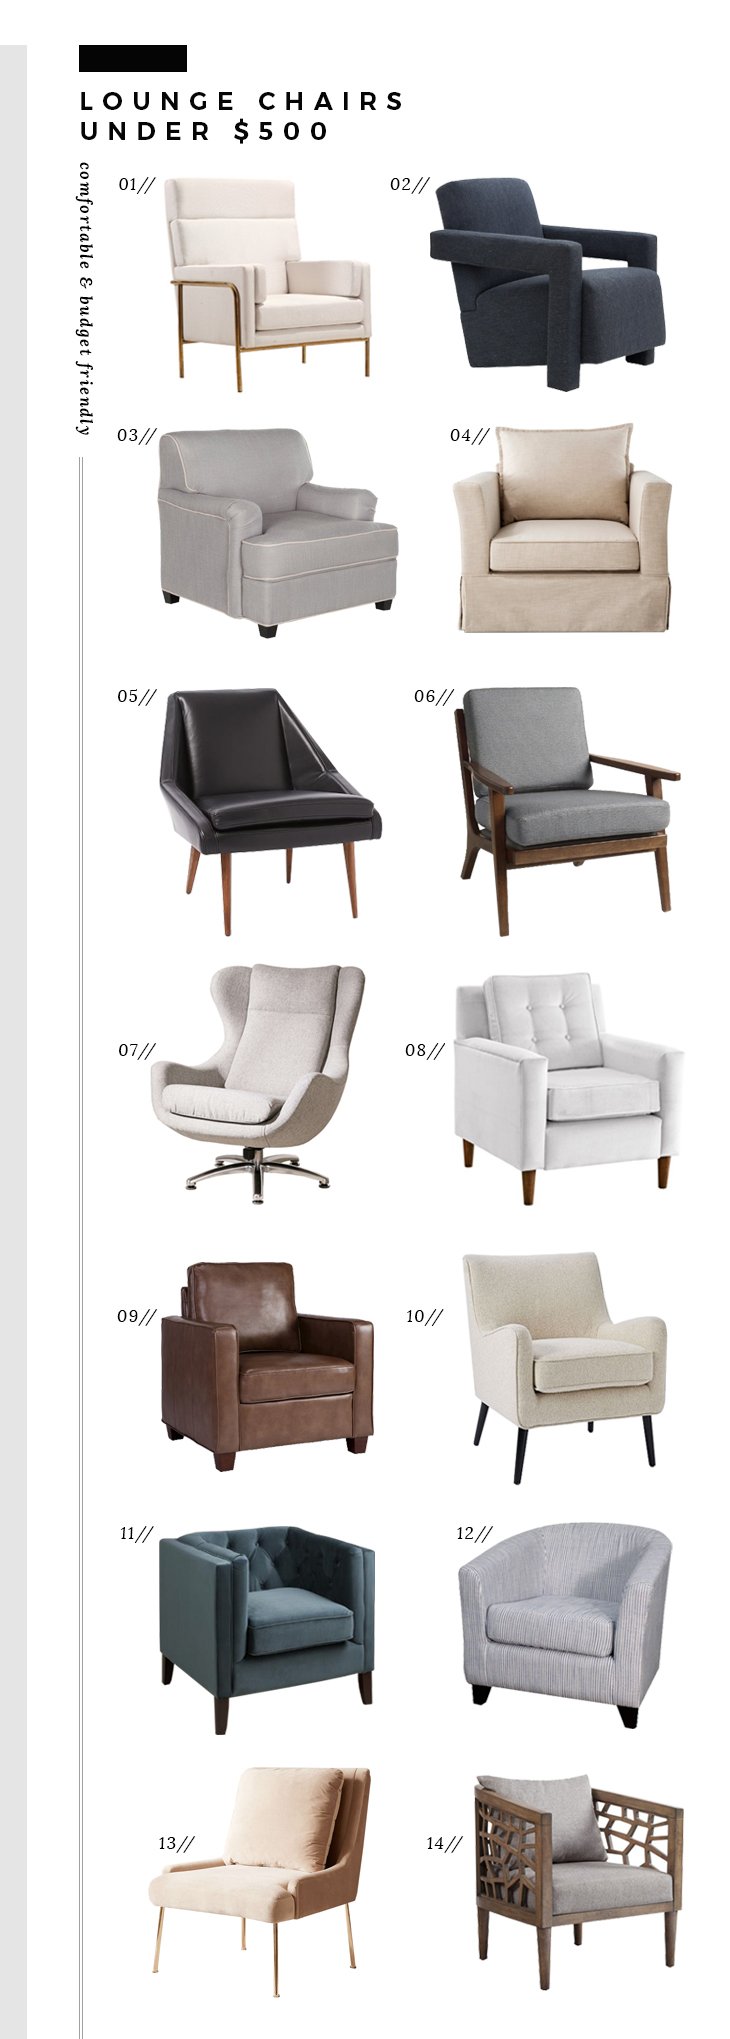 Lounge Chairs Under $500